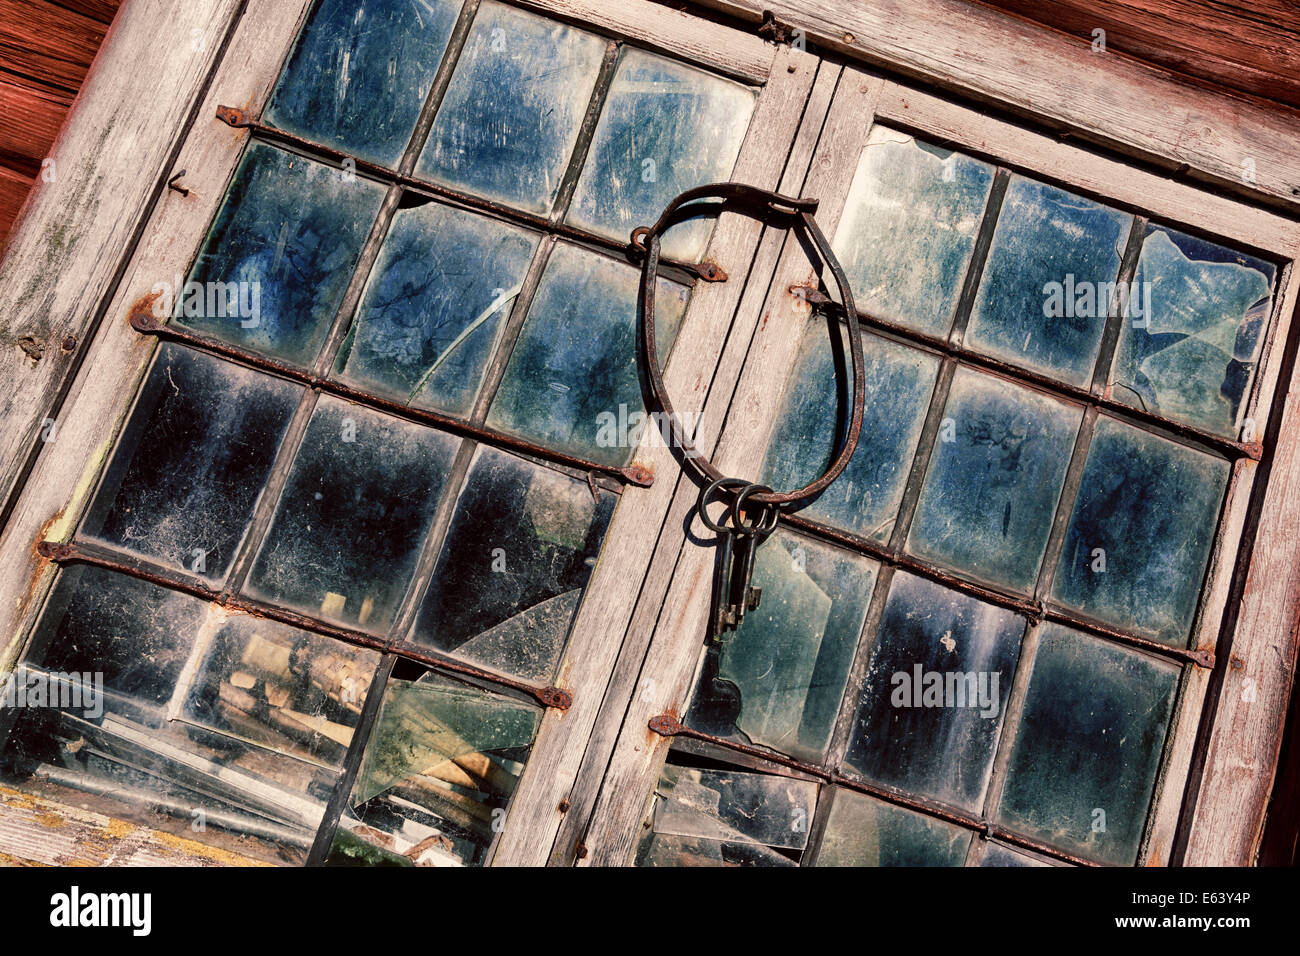 old, antique keys and ring hanging against leaded stained windows and frames, 17th century concept Stock Photo